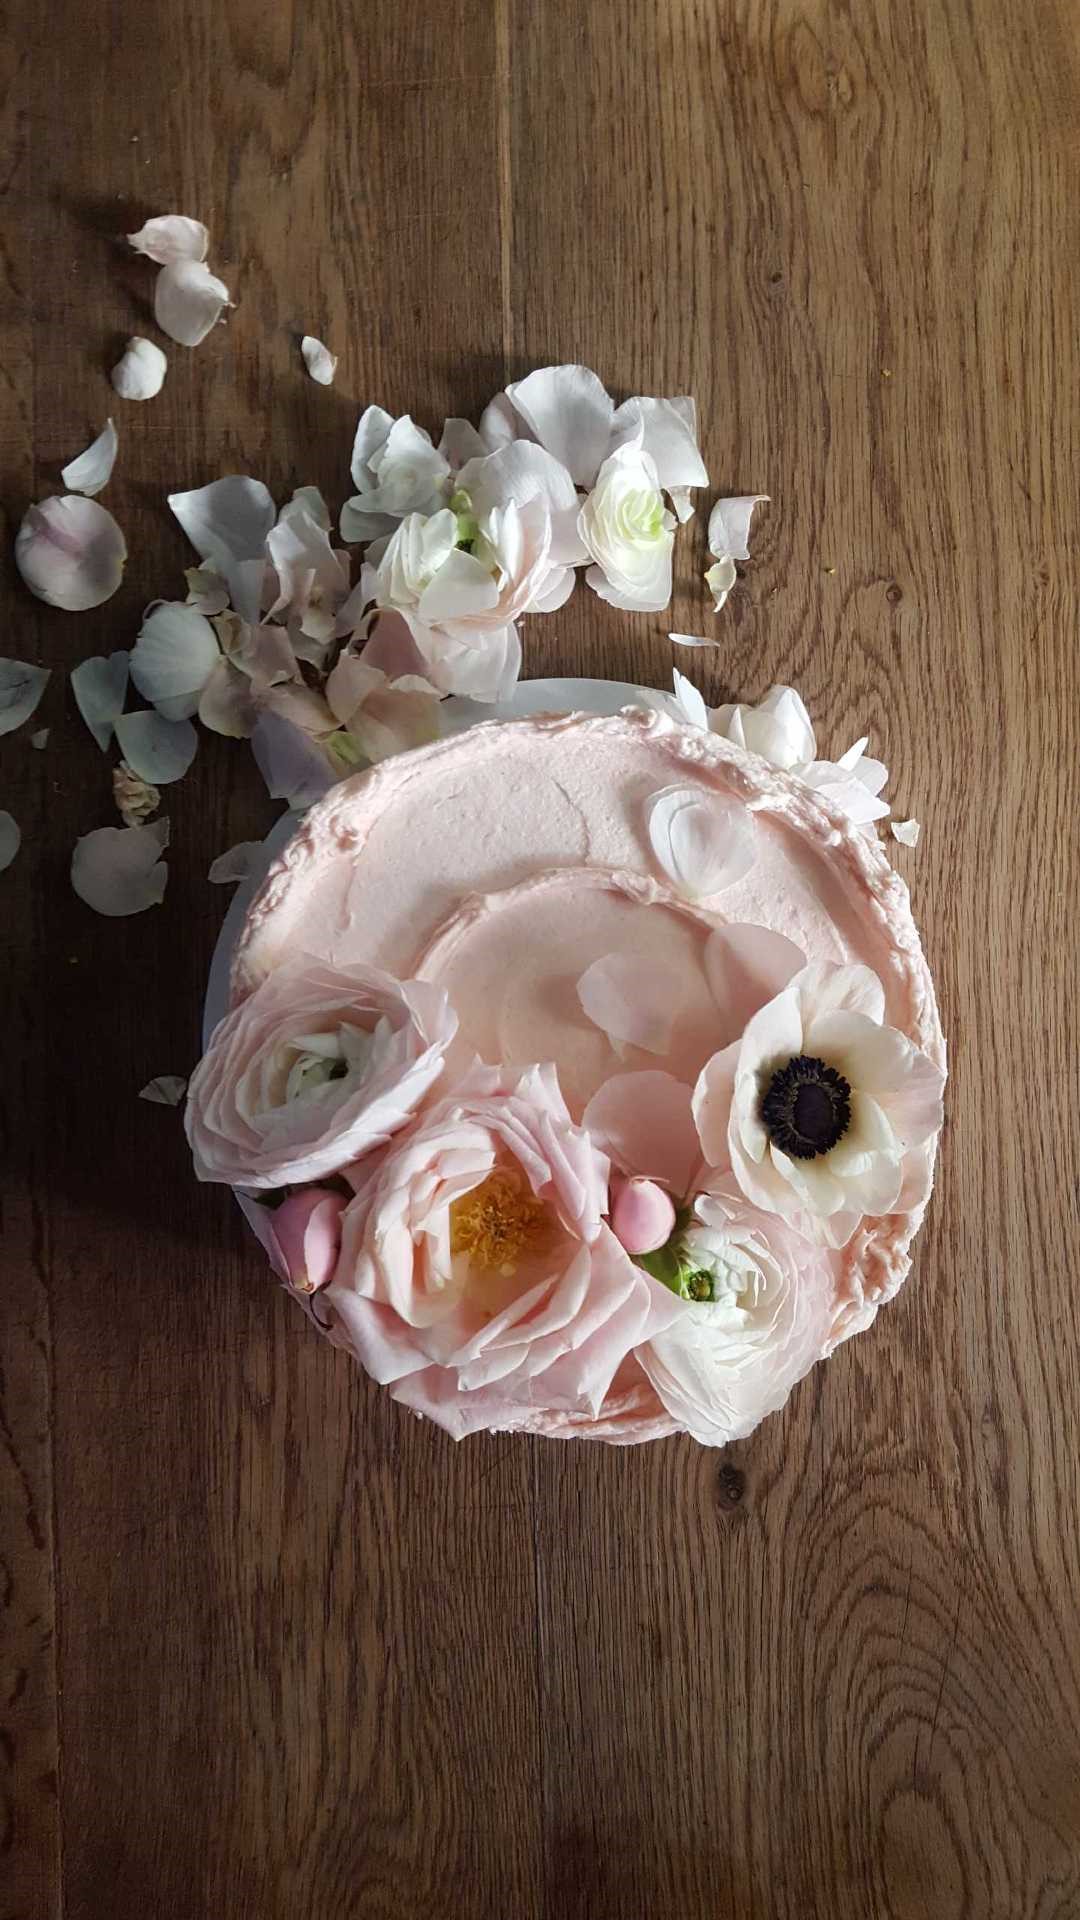 Lovely shabby chic romantic cake by Claire Ptak in London of Violet Bakery.